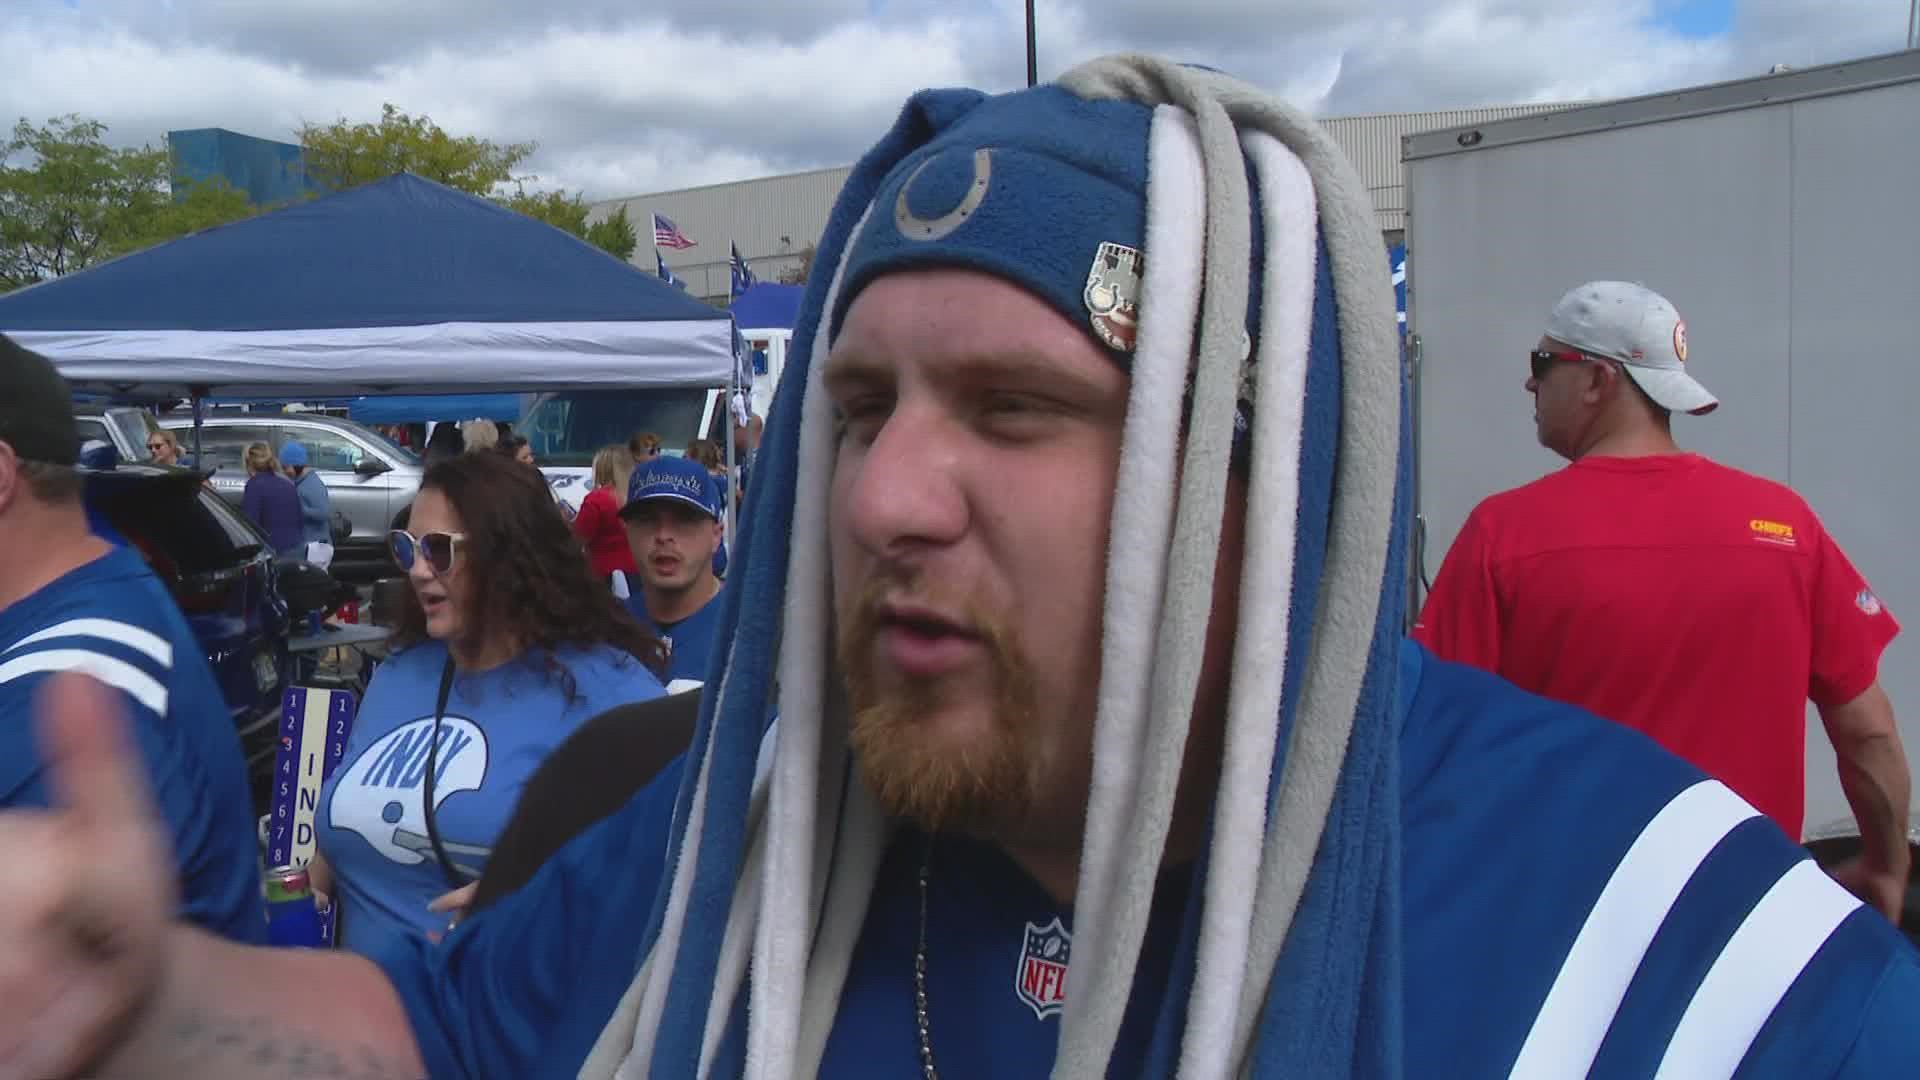 Before the Colts game began, the fan said he predicted the game would come down to three points, and he was right.